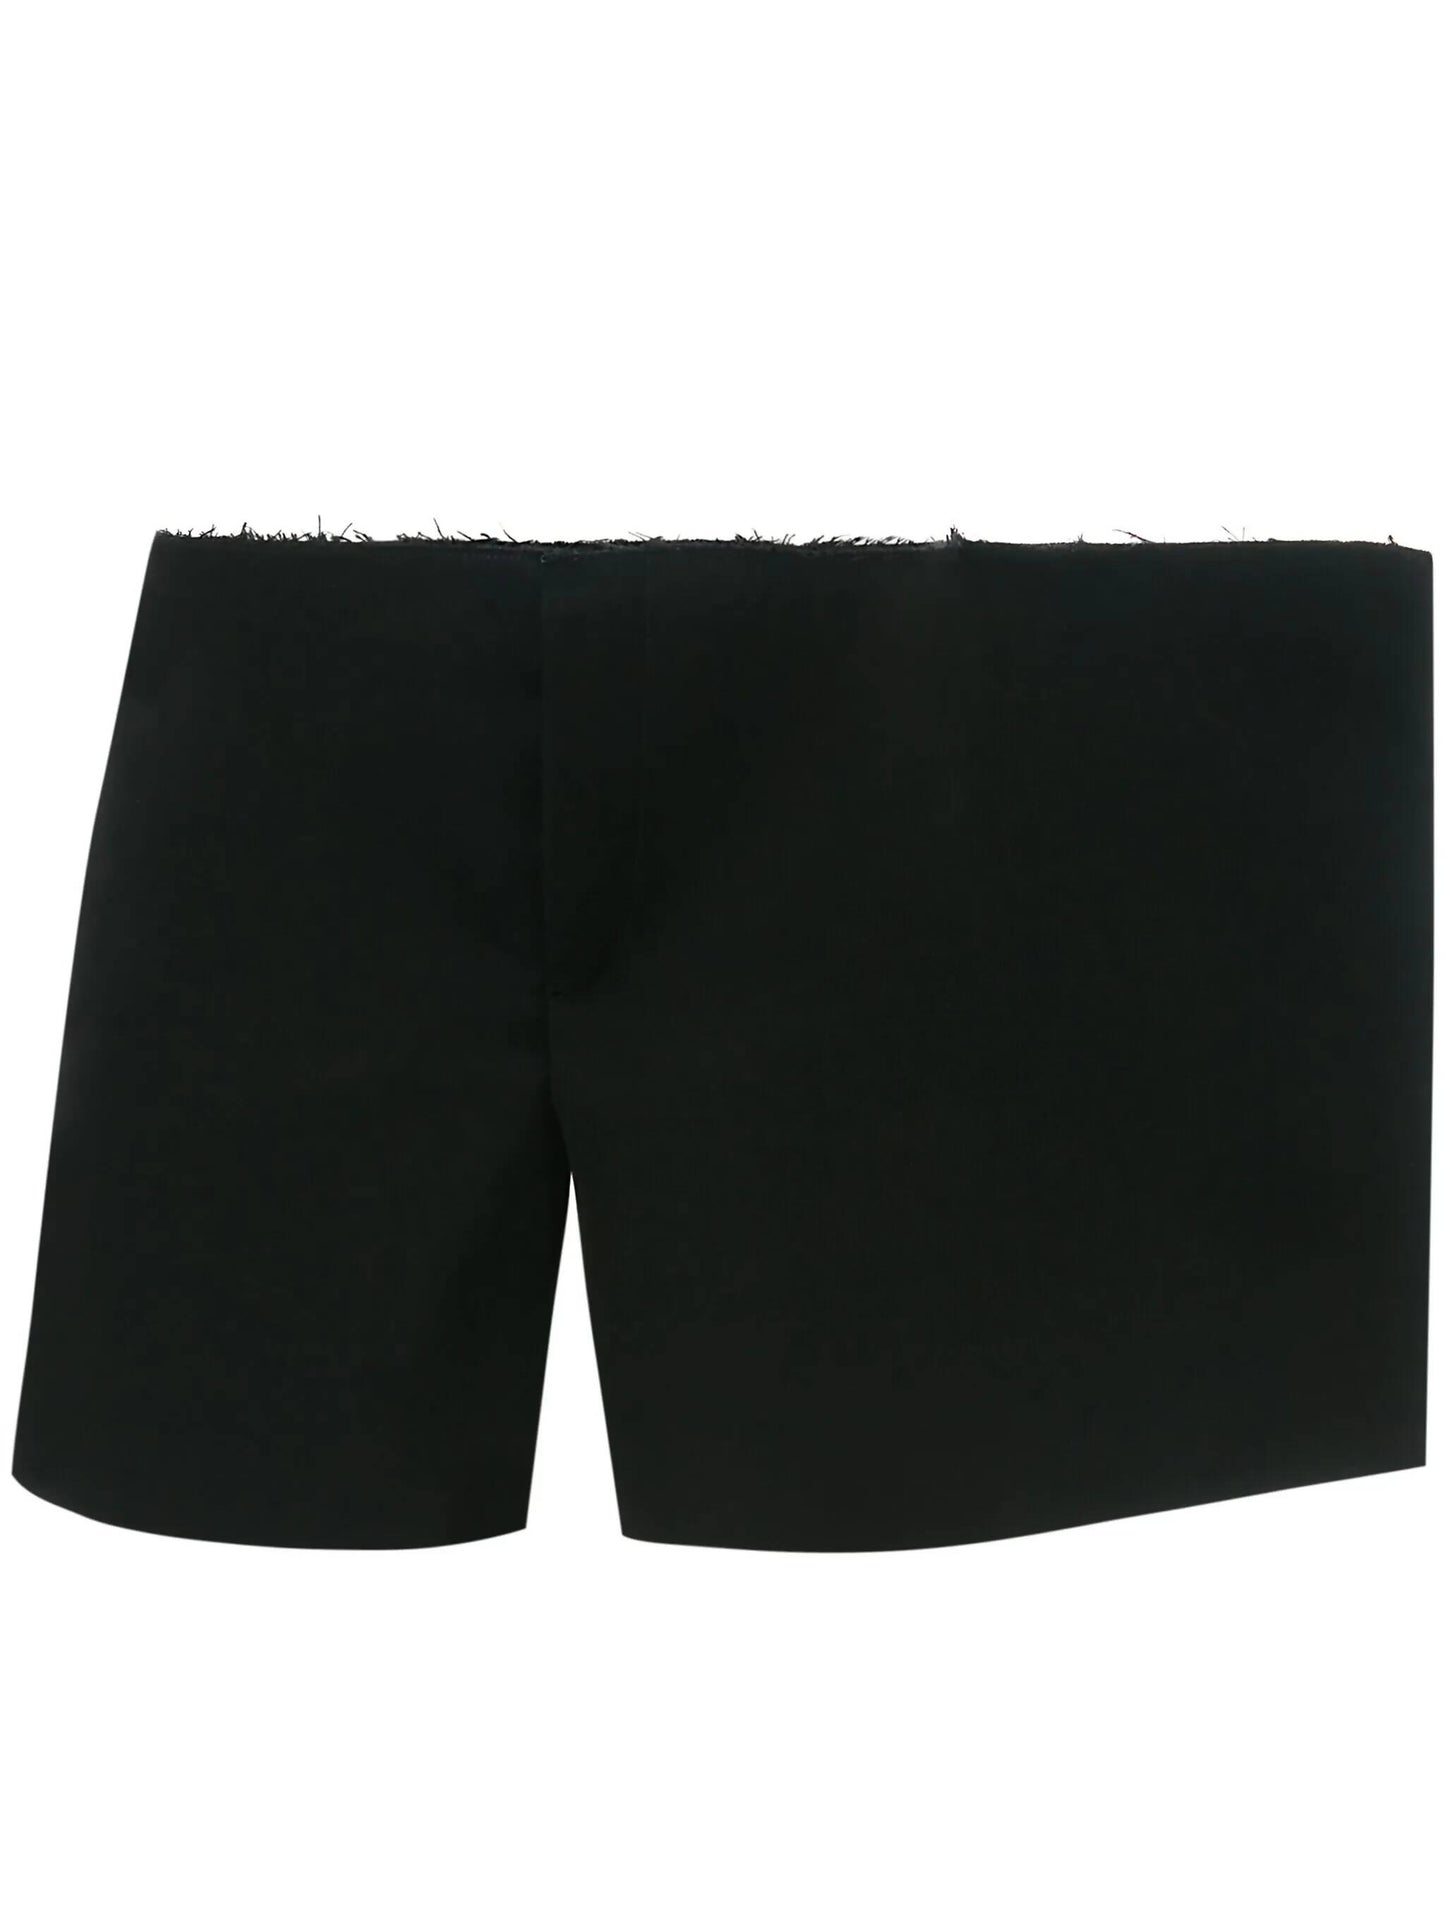 JW Anderson, Side Panel Cotton Shorts